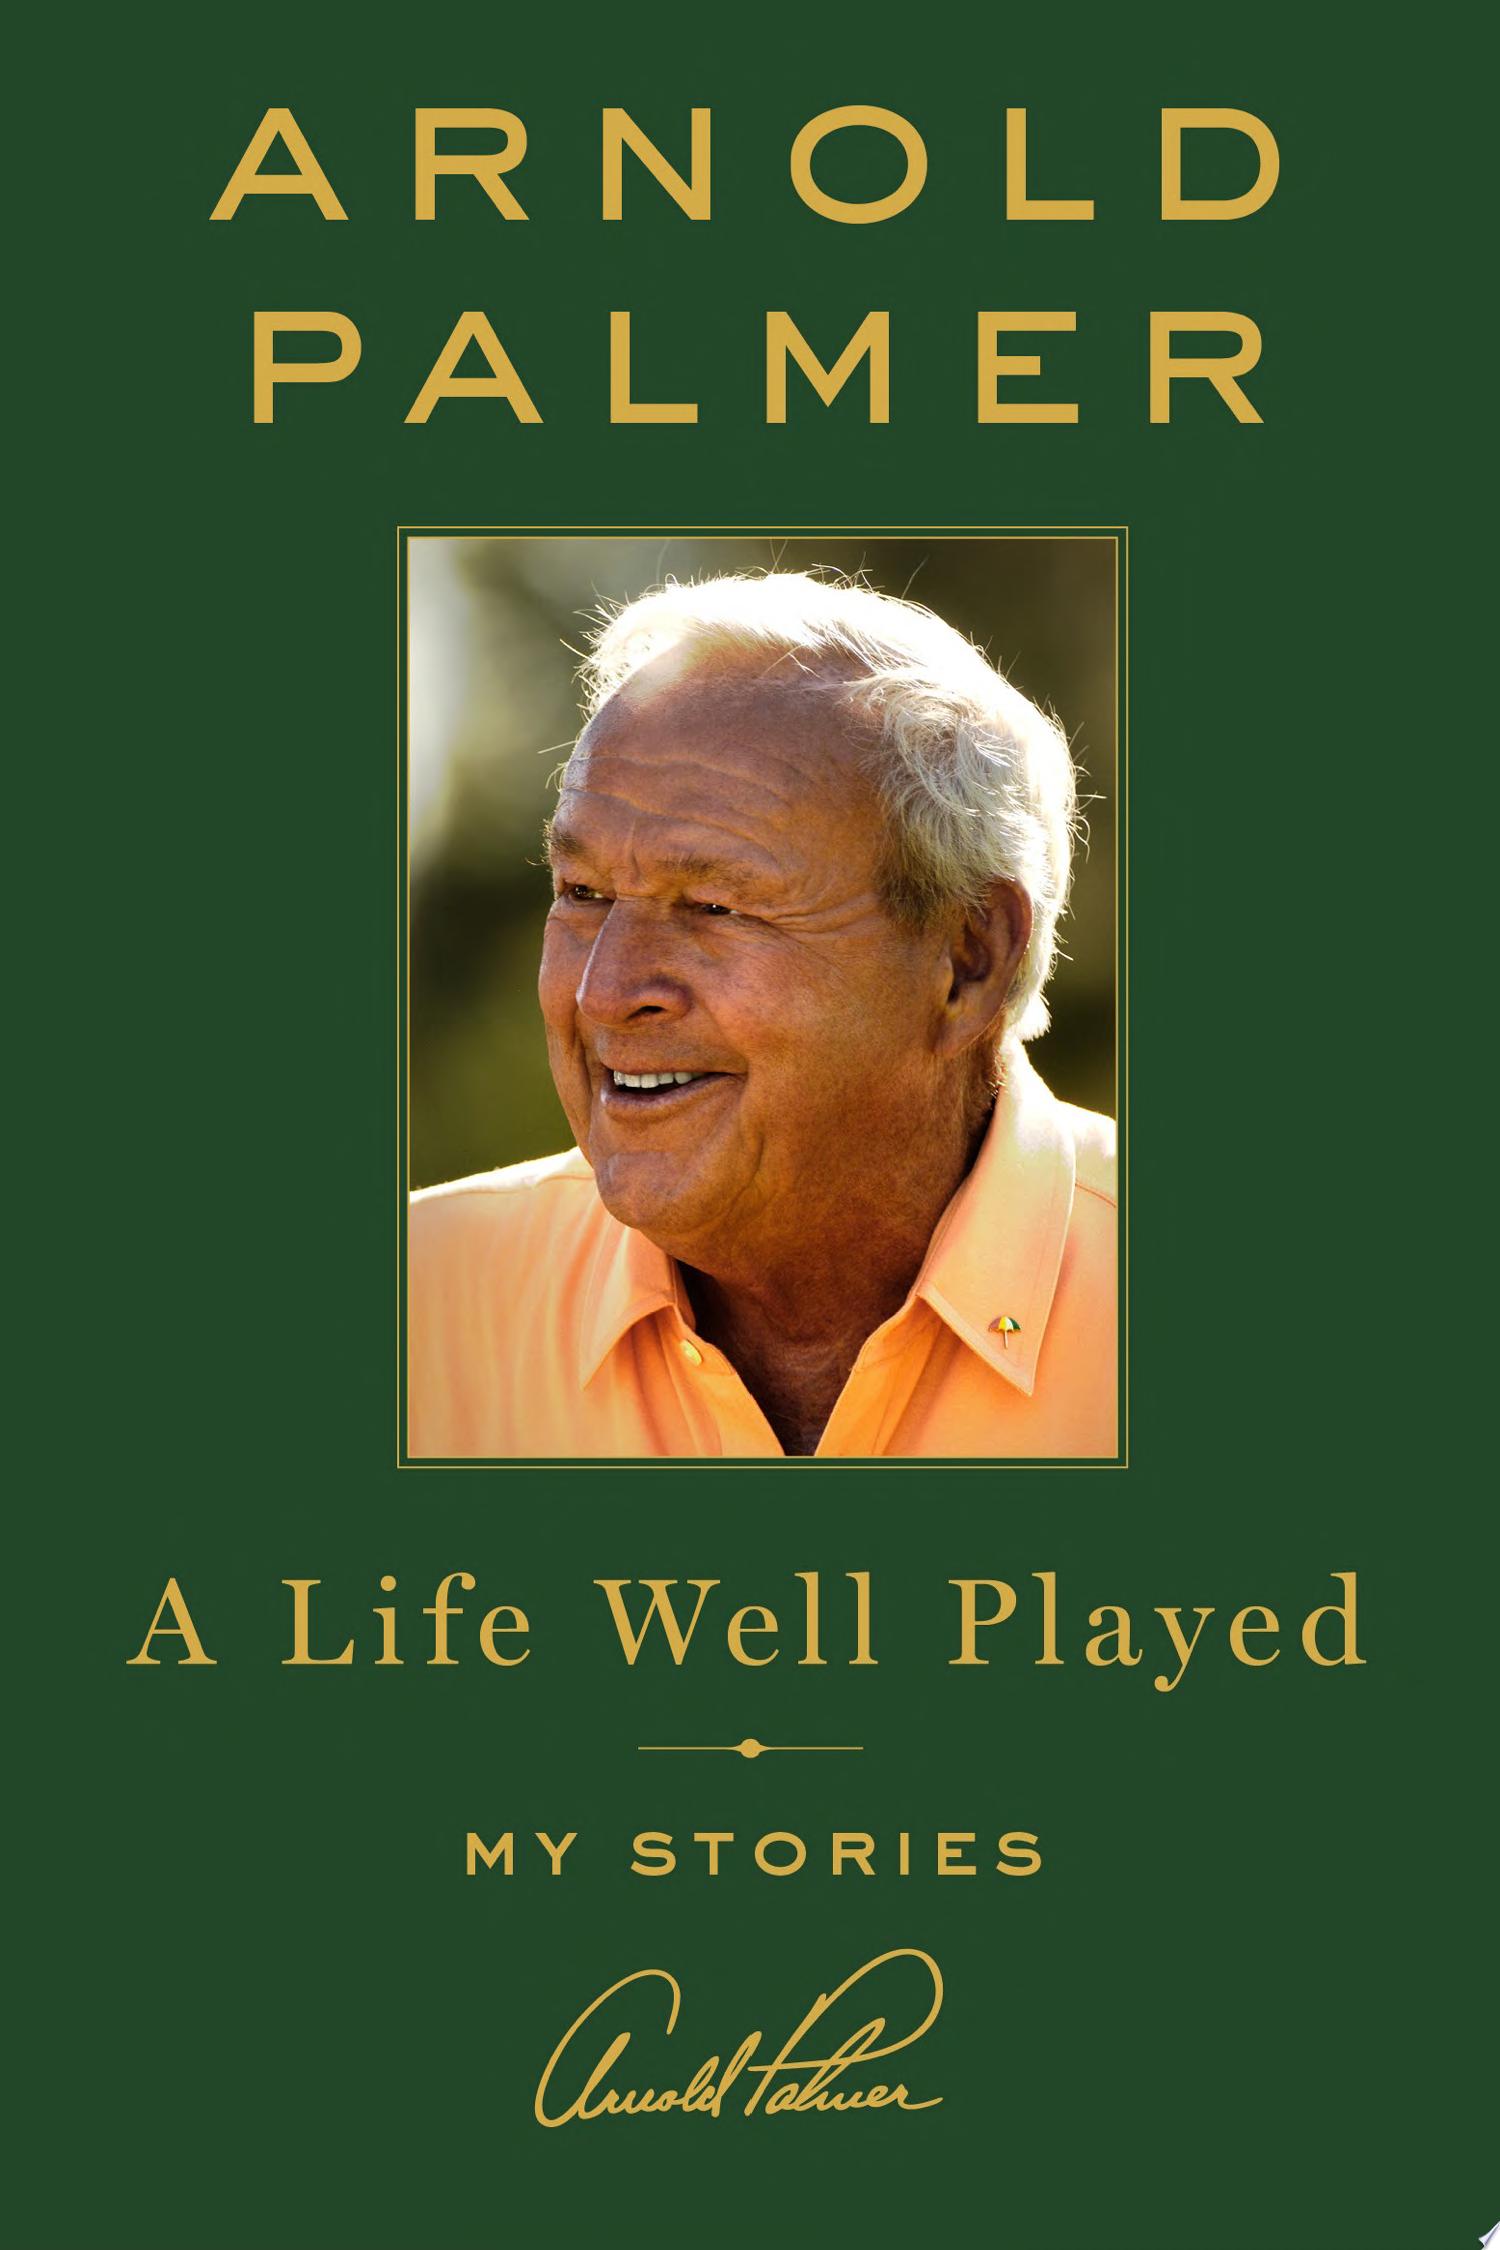 Image for "A Life Well Played"